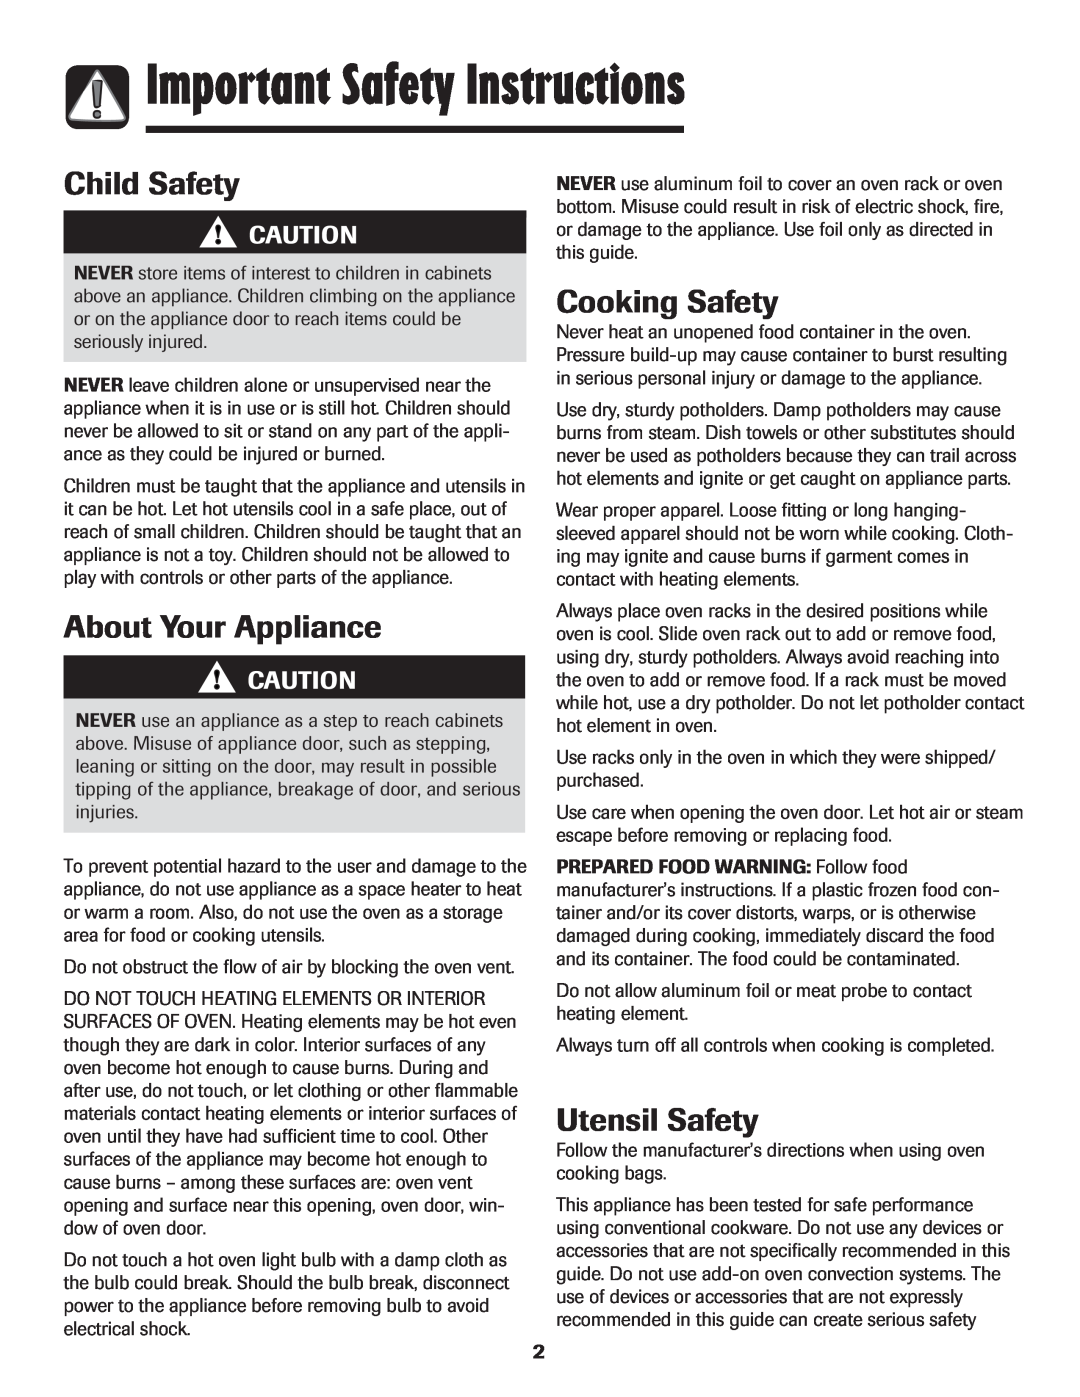 Amana AER5845RAW warranty Important Safety Instructions, Child Safety, About Your Appliance, Cooking Safety, Utensil Safety 